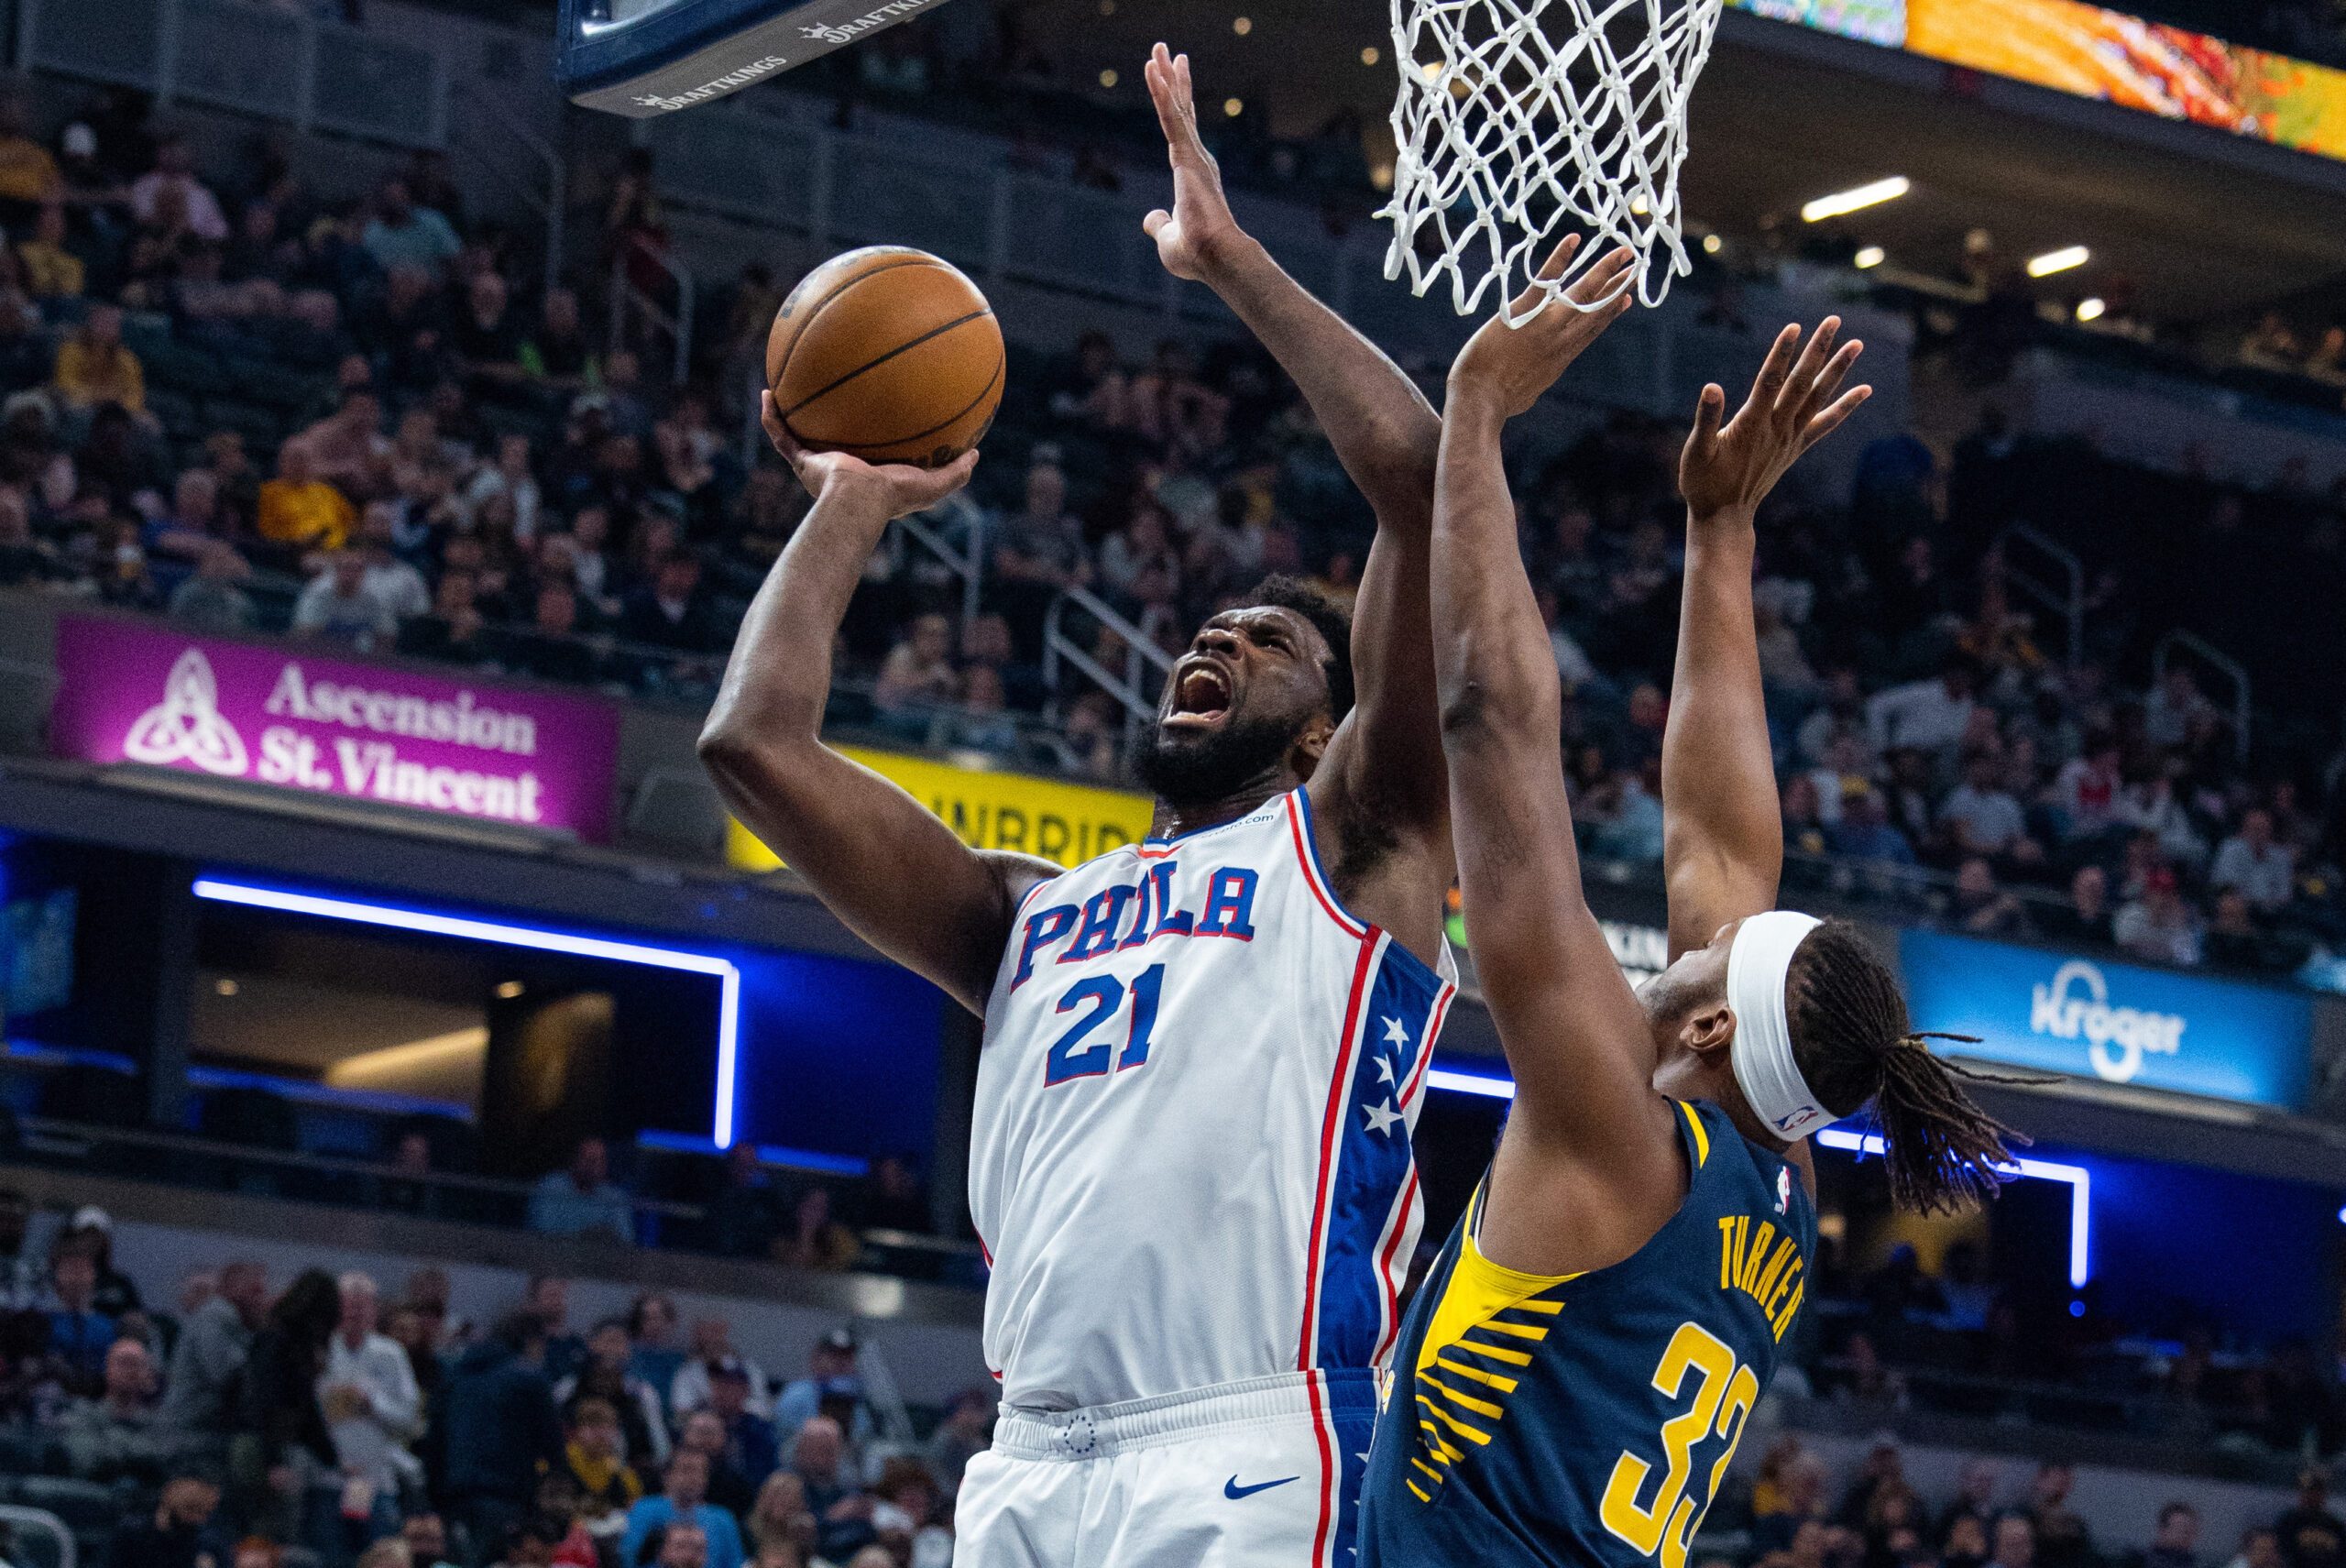 Embiid, Haliburton show out as 76ers outlast Pacers in high-scoring spree